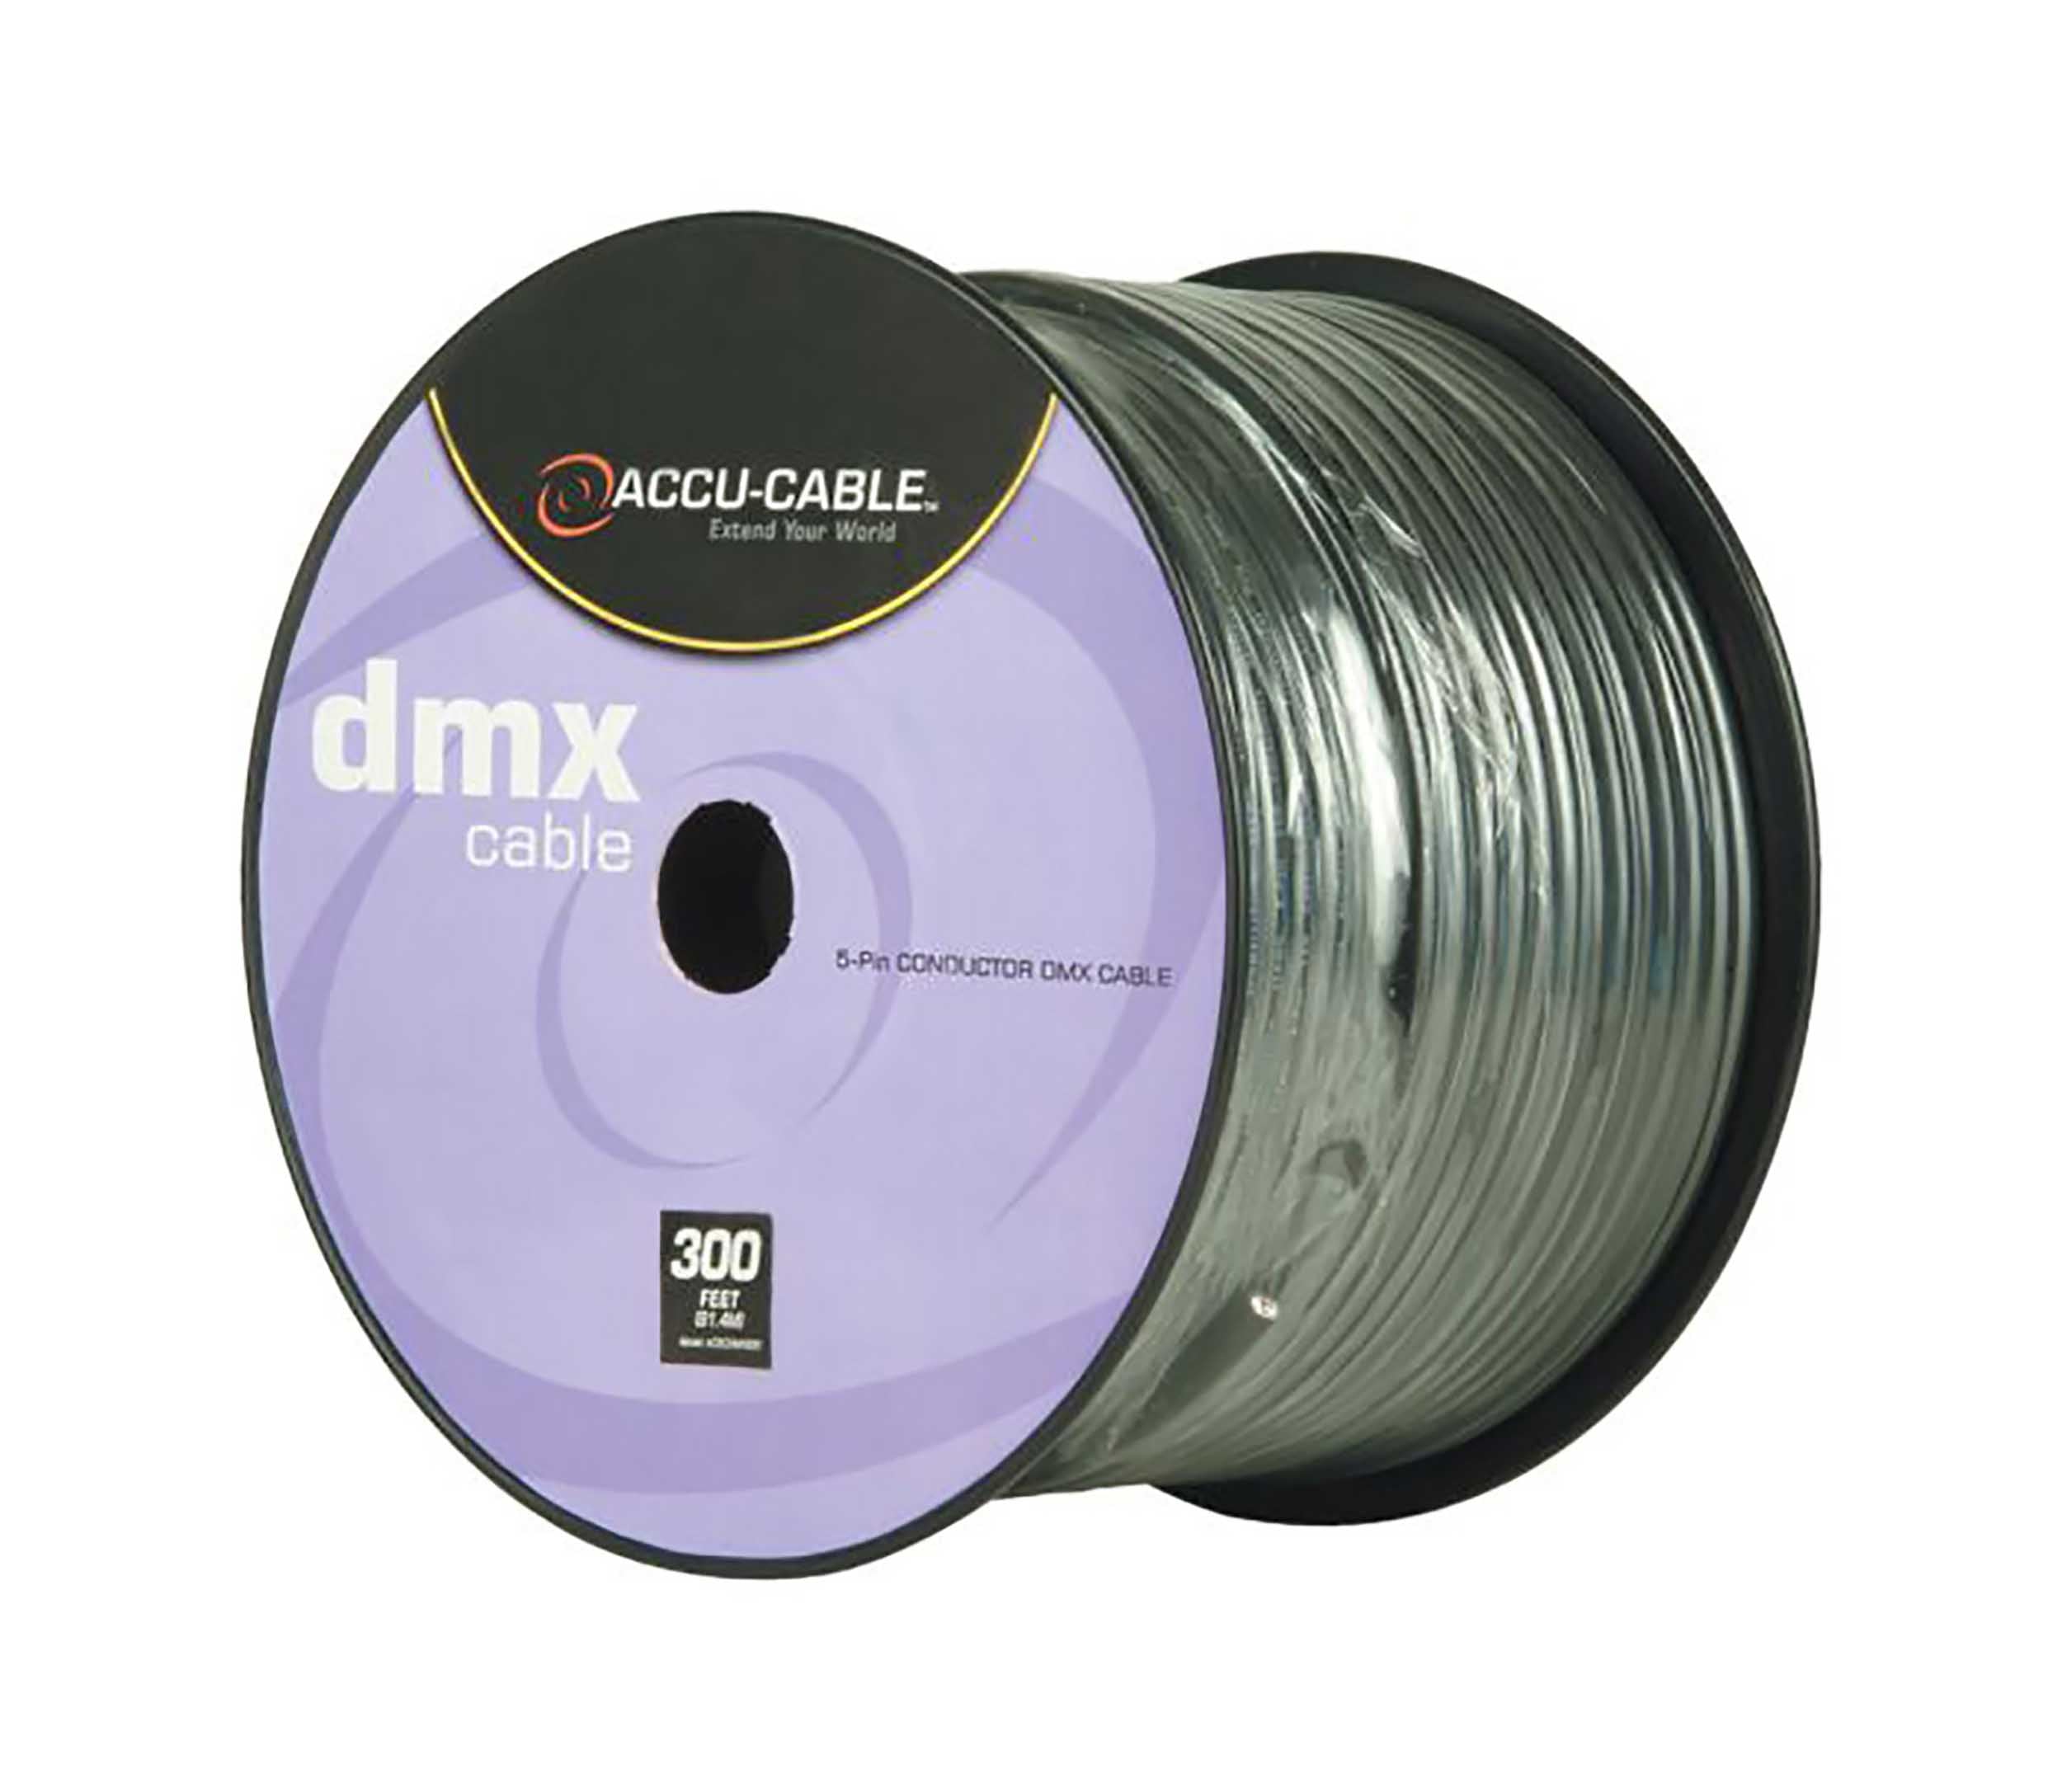 Accu-Cable AC5CDMX300, 5-Pin 22 AWG DMX Cable Spool - 300 Ft by Accu Cable